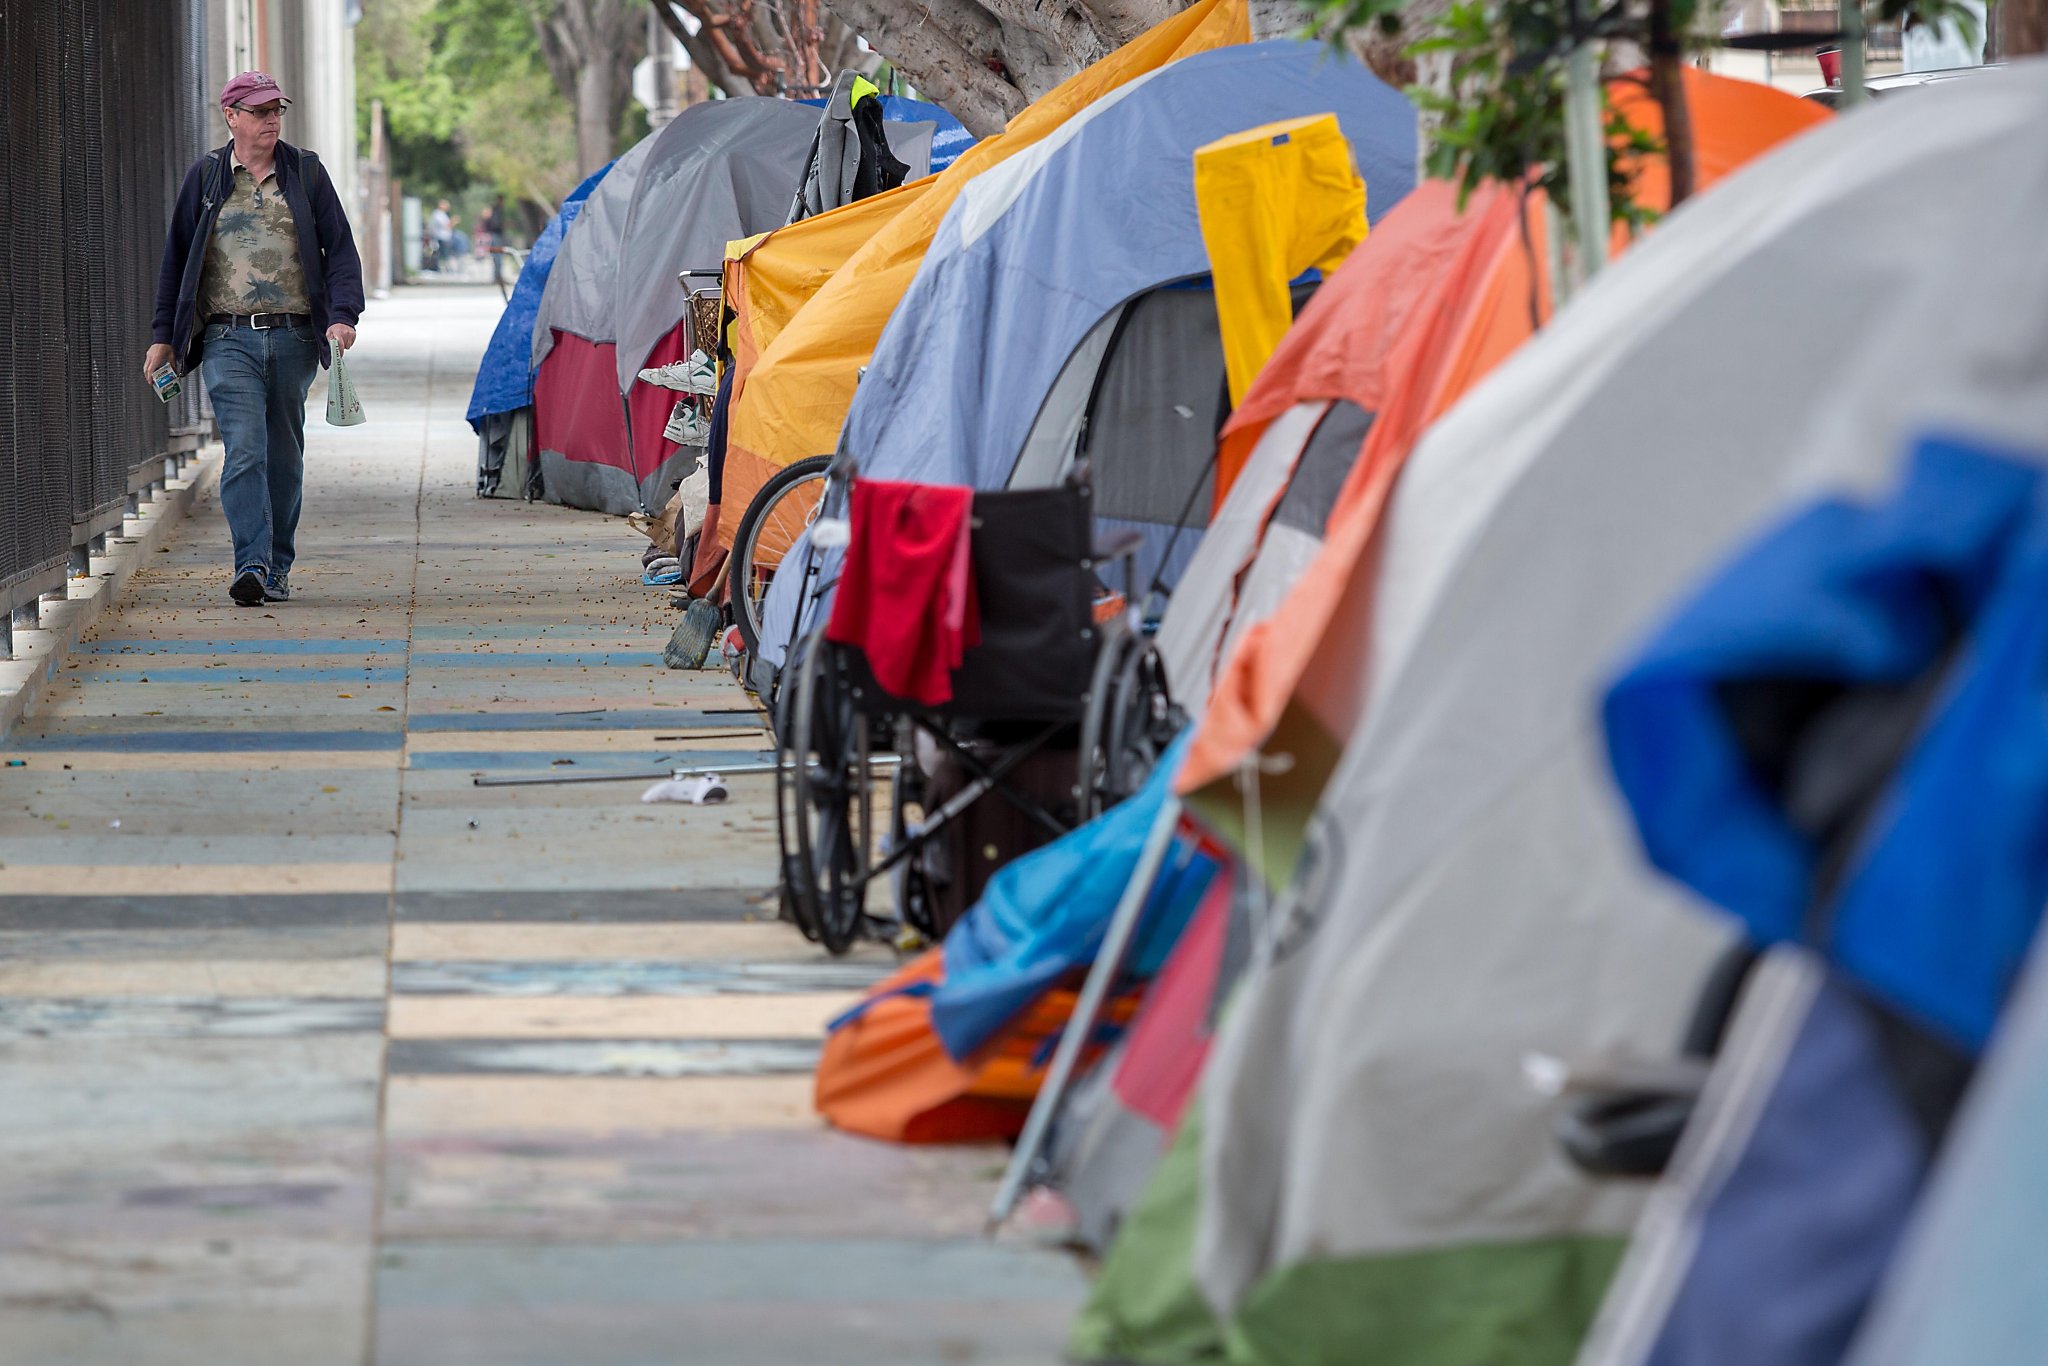 SF mayor plans crackdown on homeless camps citywide